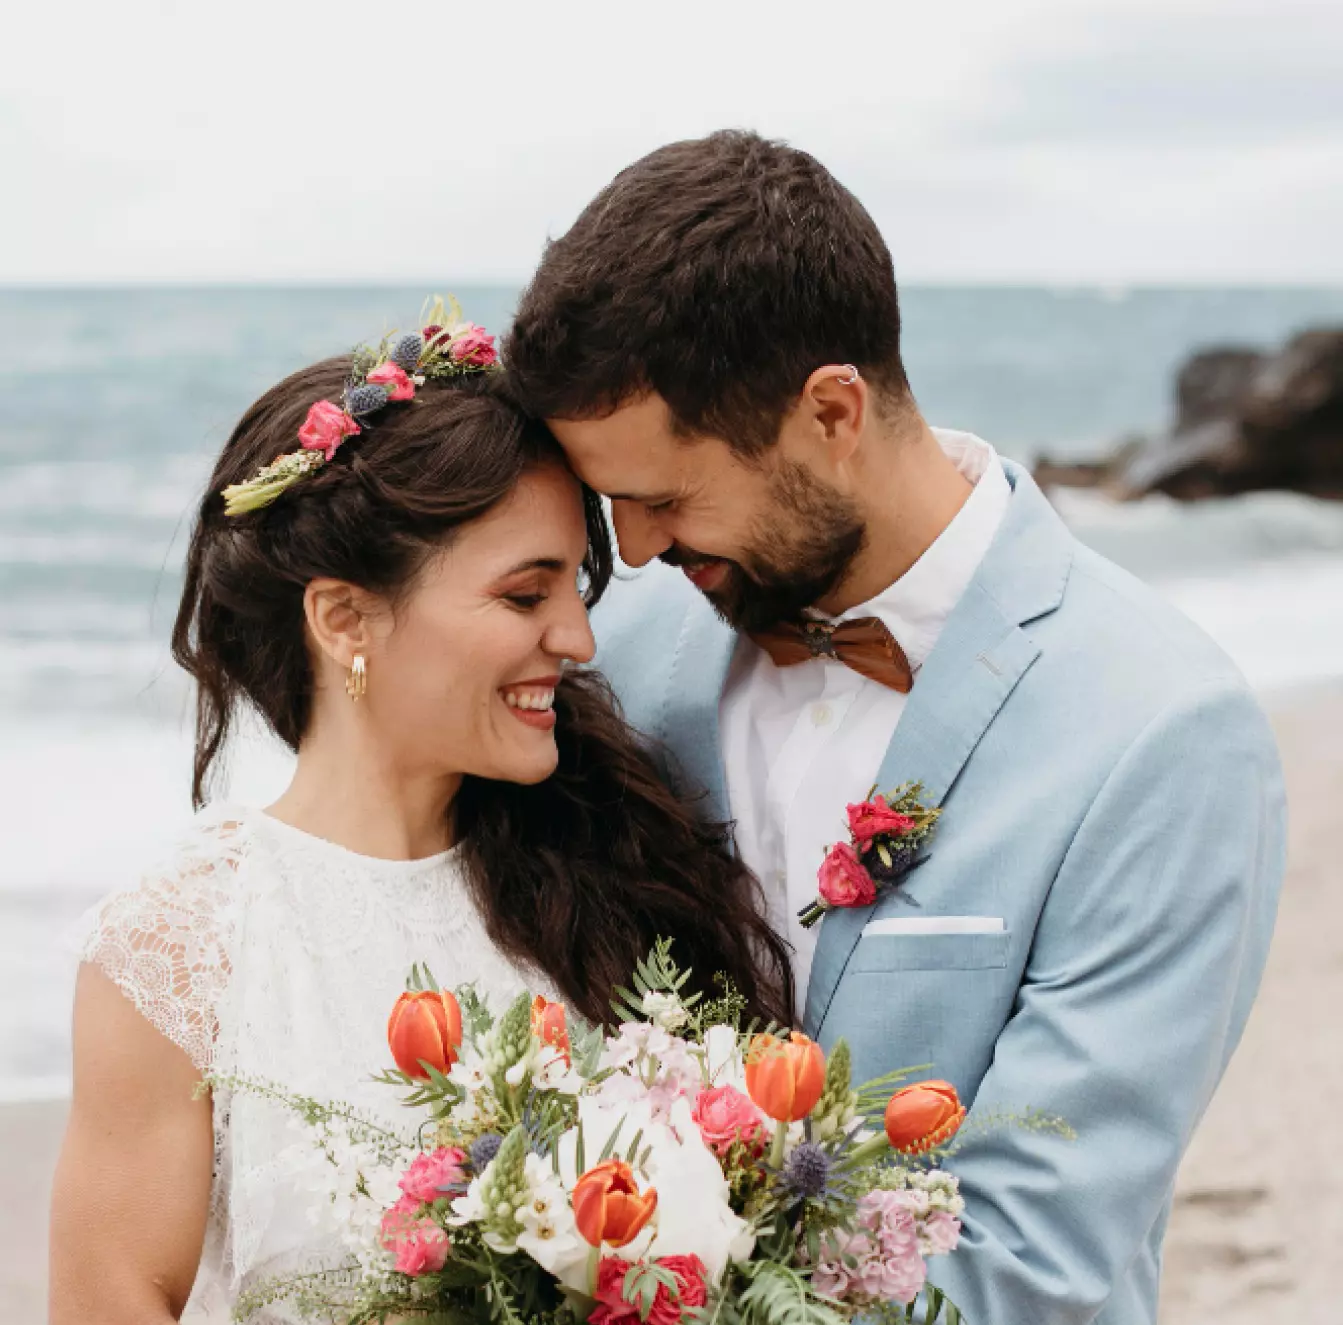 Newlyweds with flowers